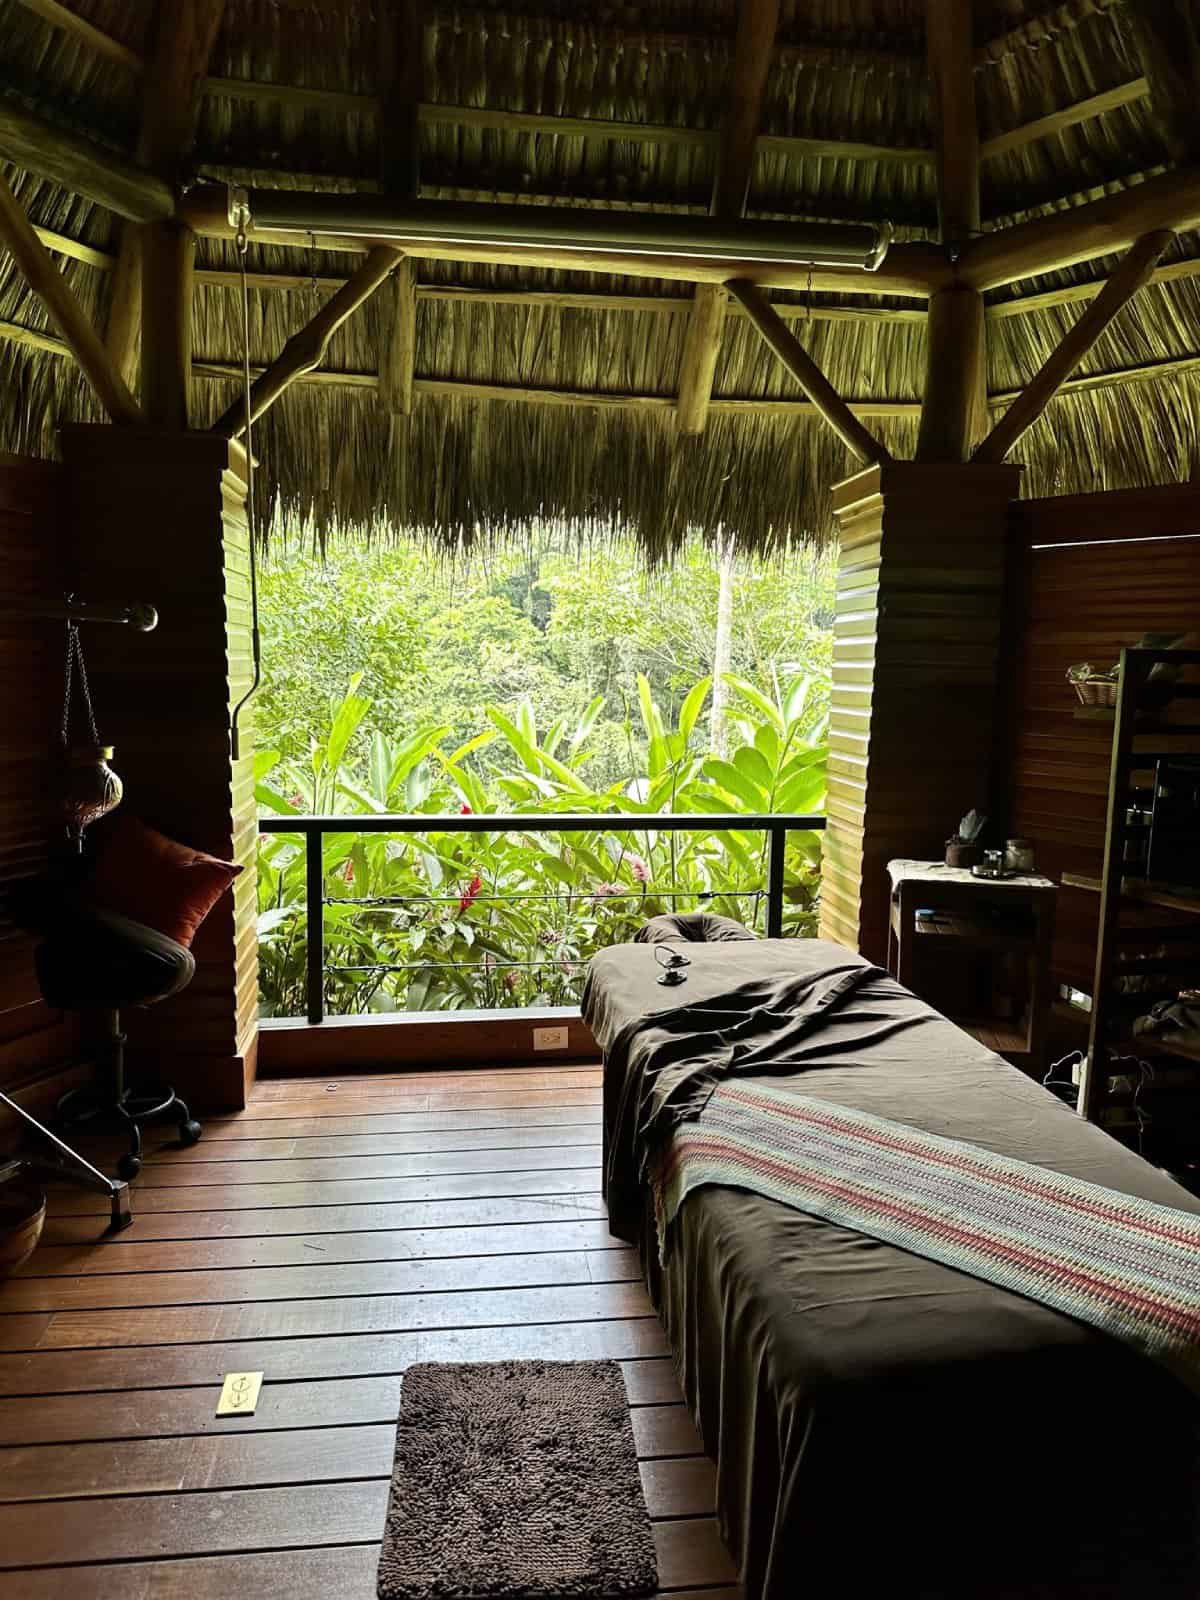 Amor Arenal hotel review - what to expect from this boutique Costa Rica luxury resort - open-air spa room